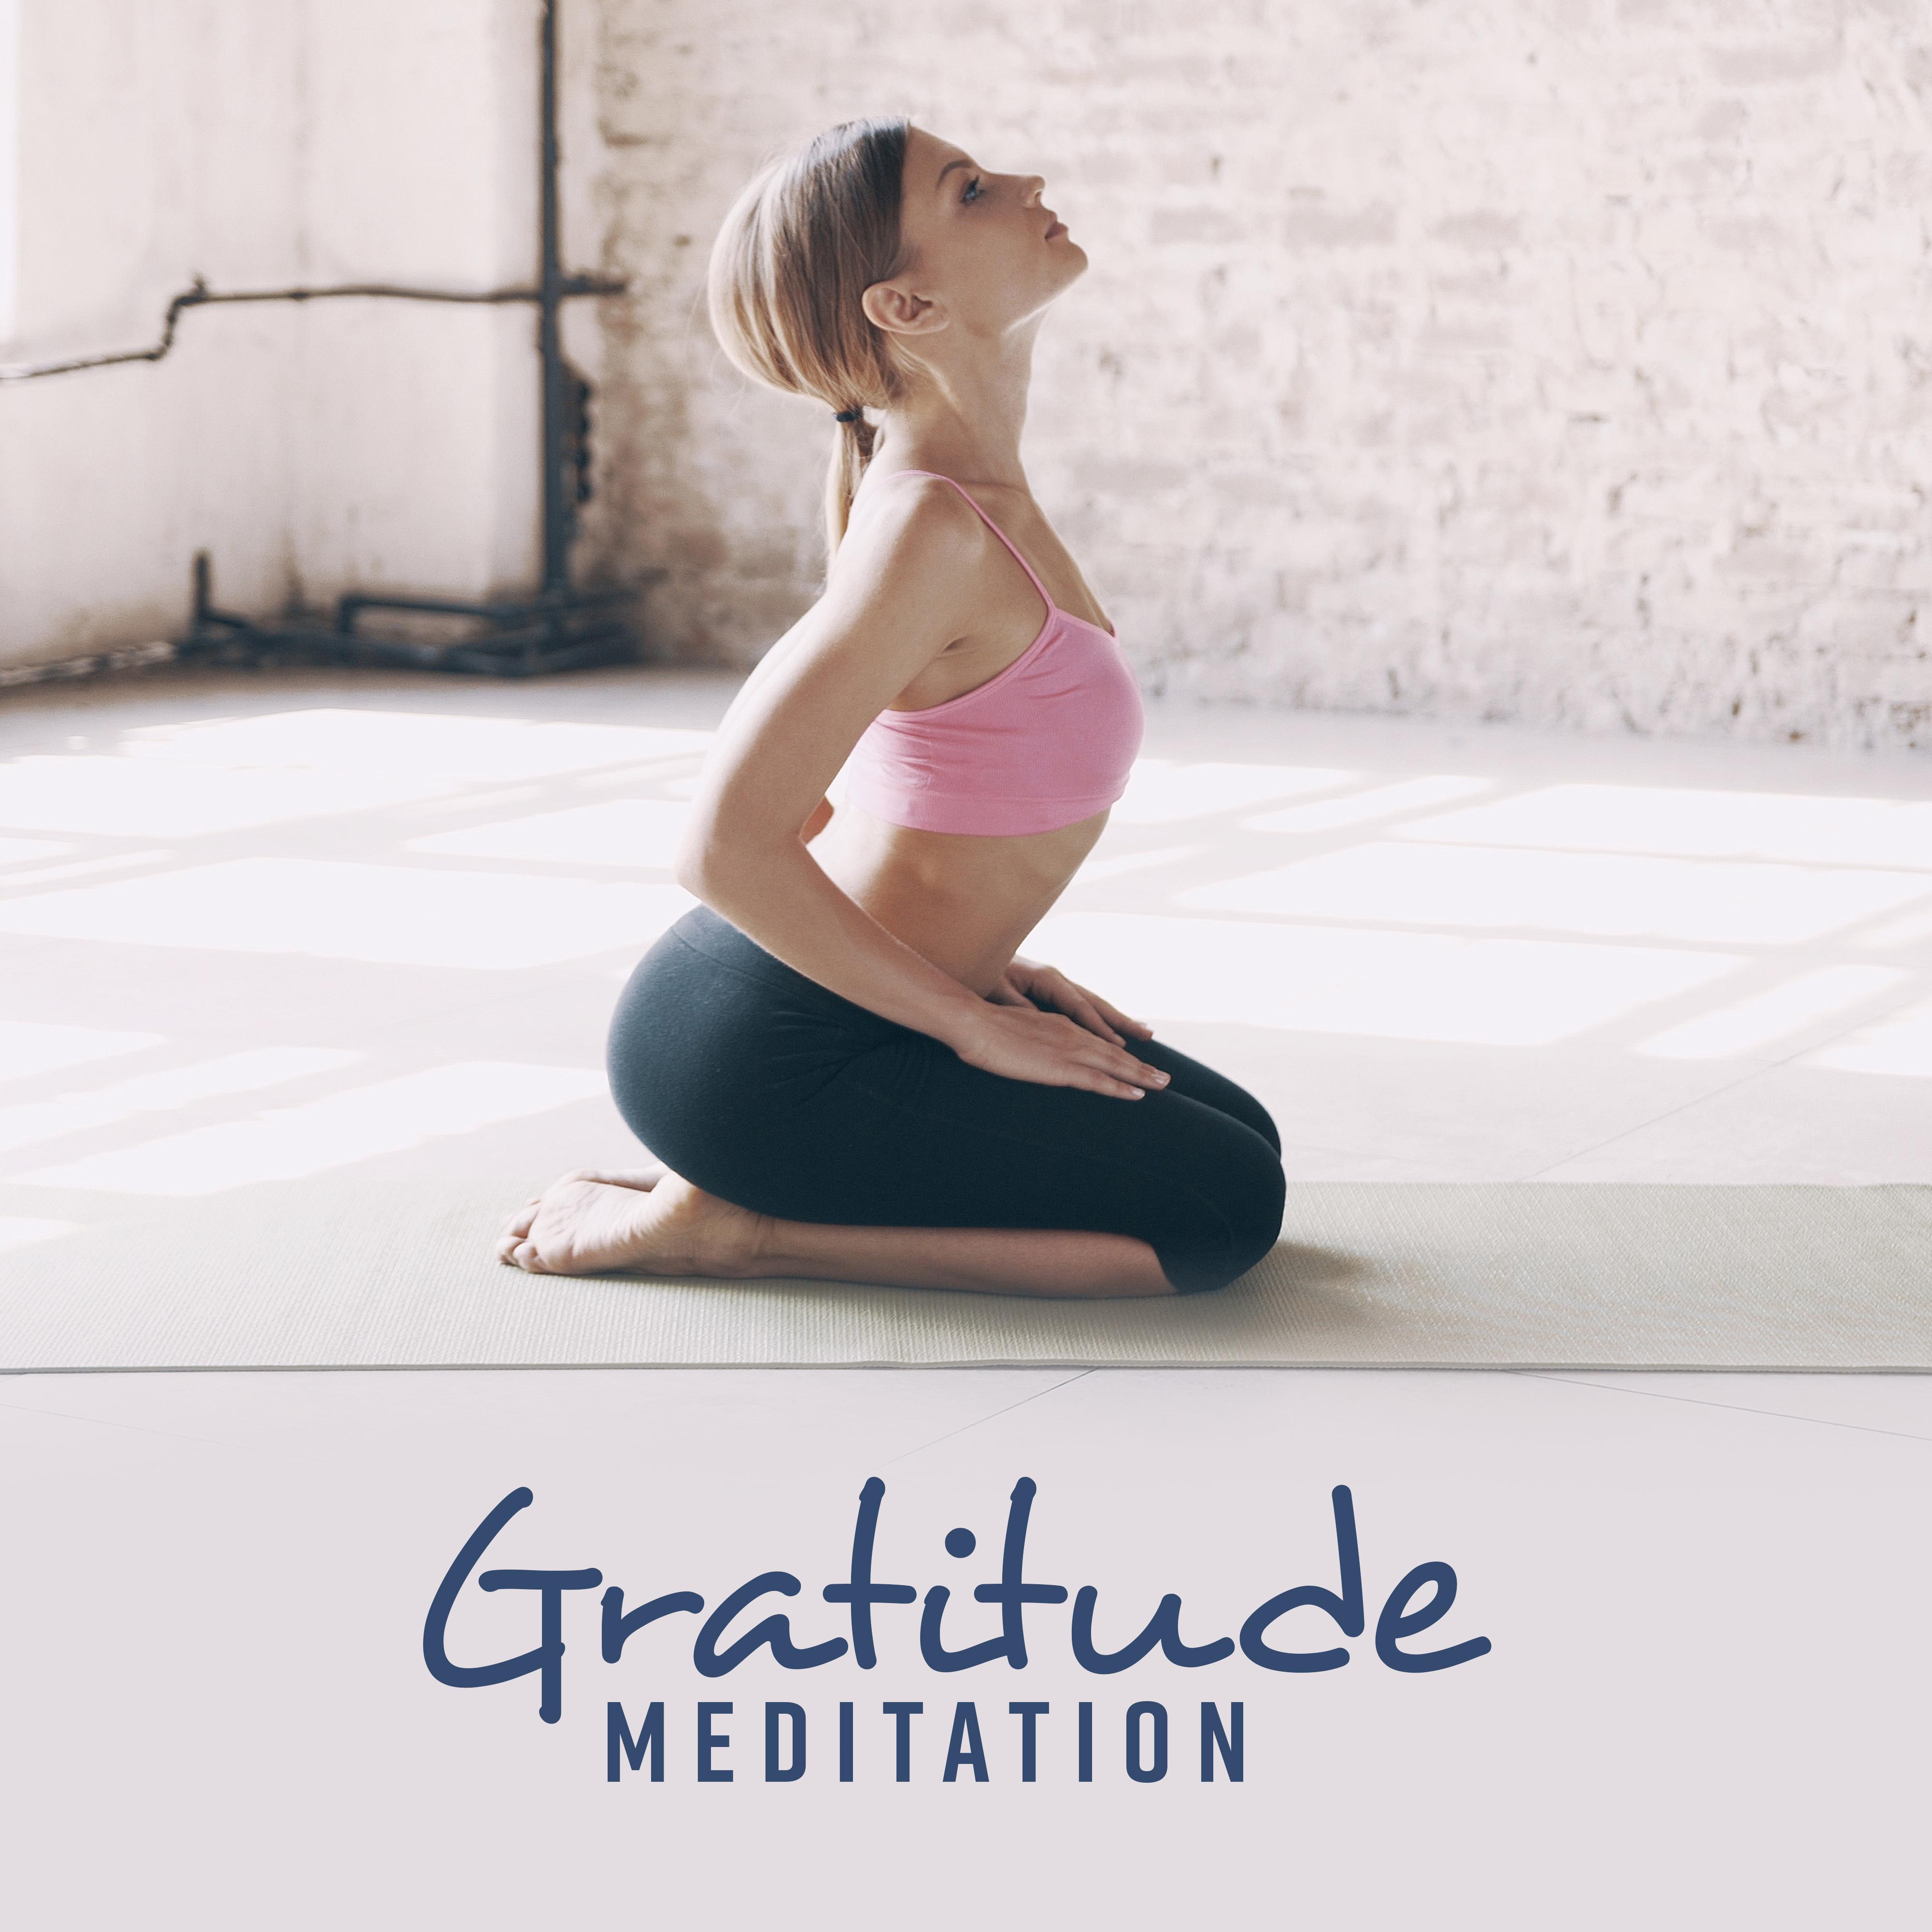 Gratitude Meditation: Meditative Music Helpful in Achieving Happiness, Well-Being and Joy